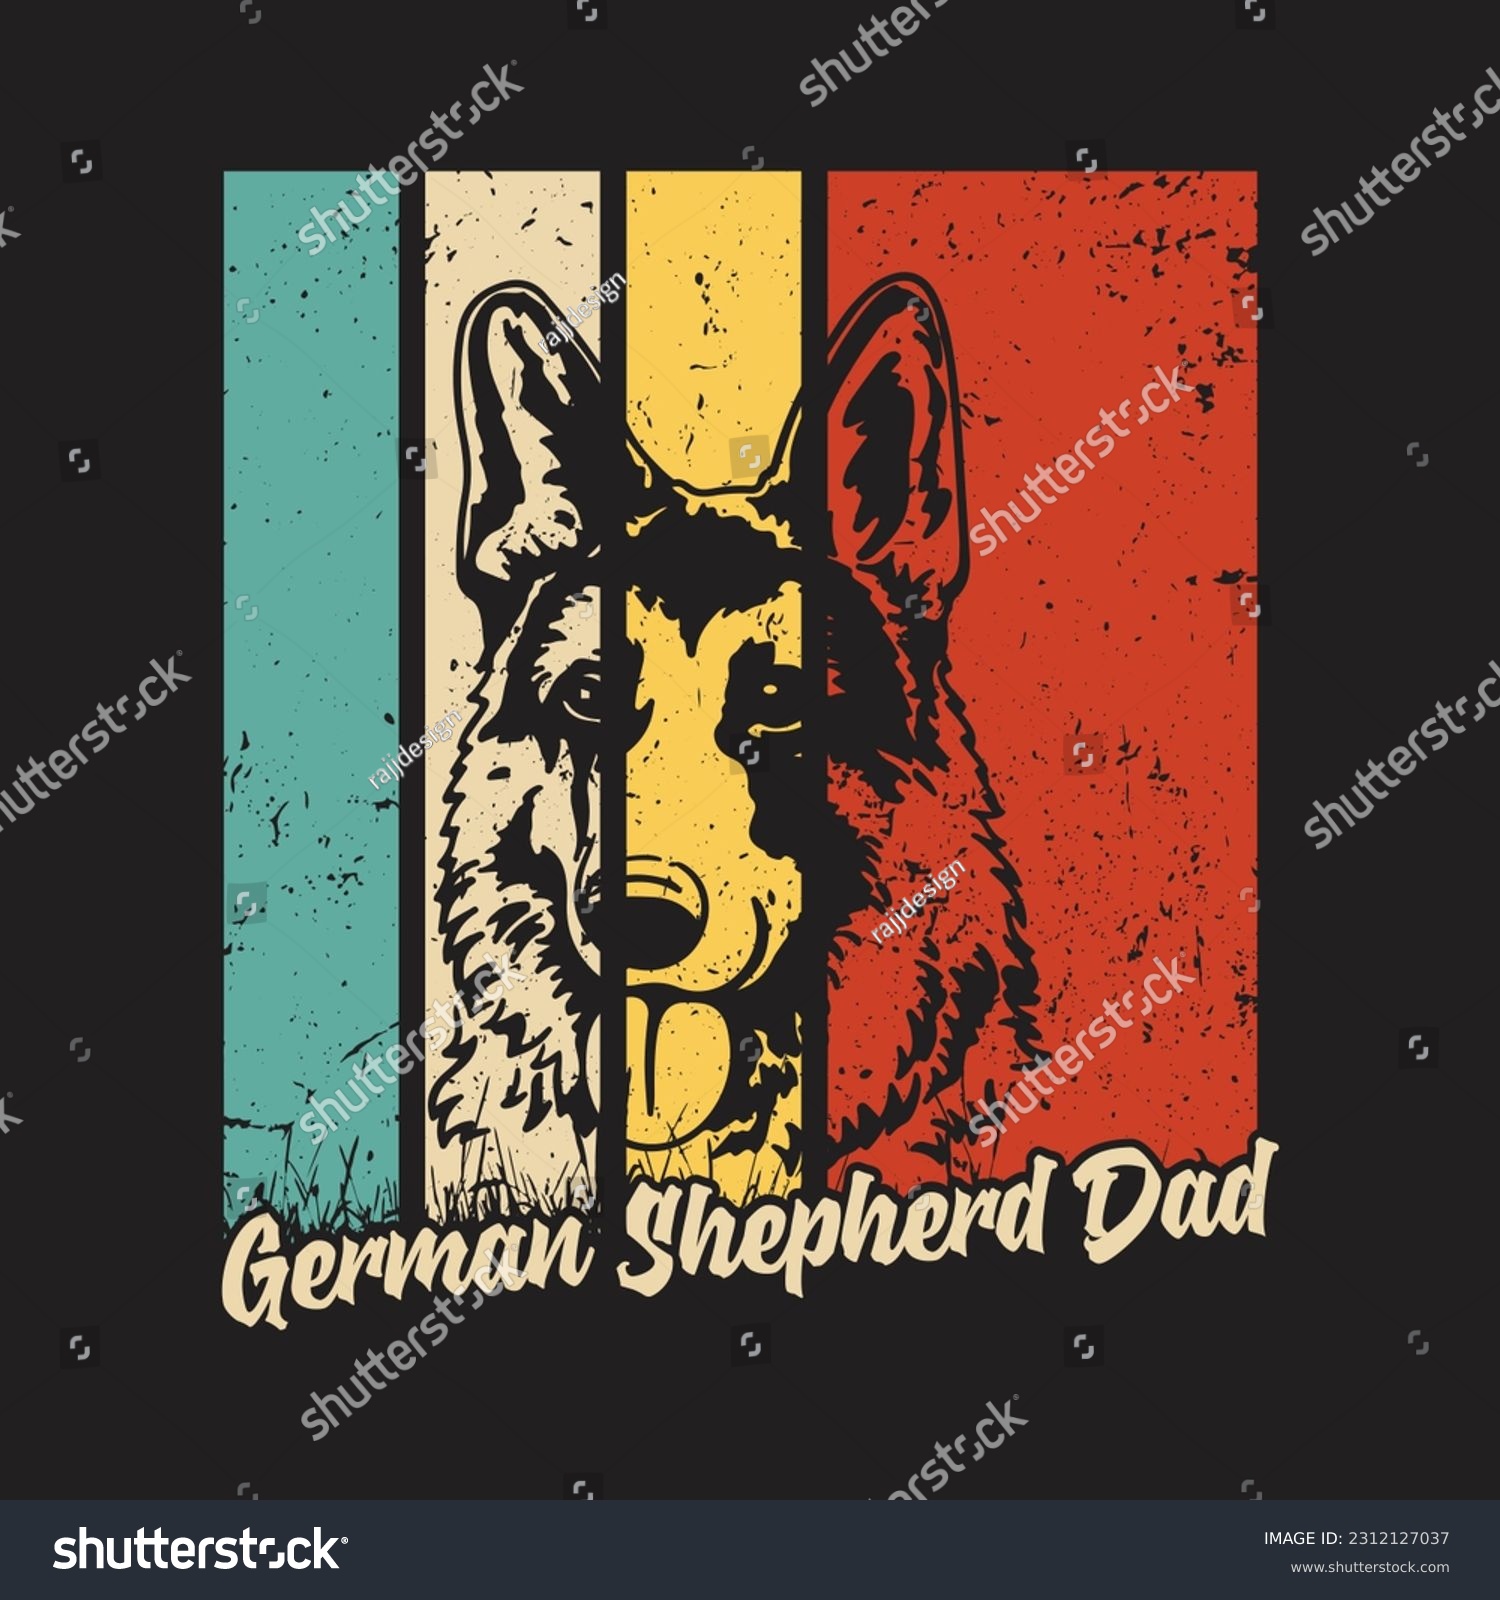 SVG of German Shepherd Dad Dog T-Shirt Design, Posters, Greeting Cards, Textiles, and Sticker Vector Illustration svg